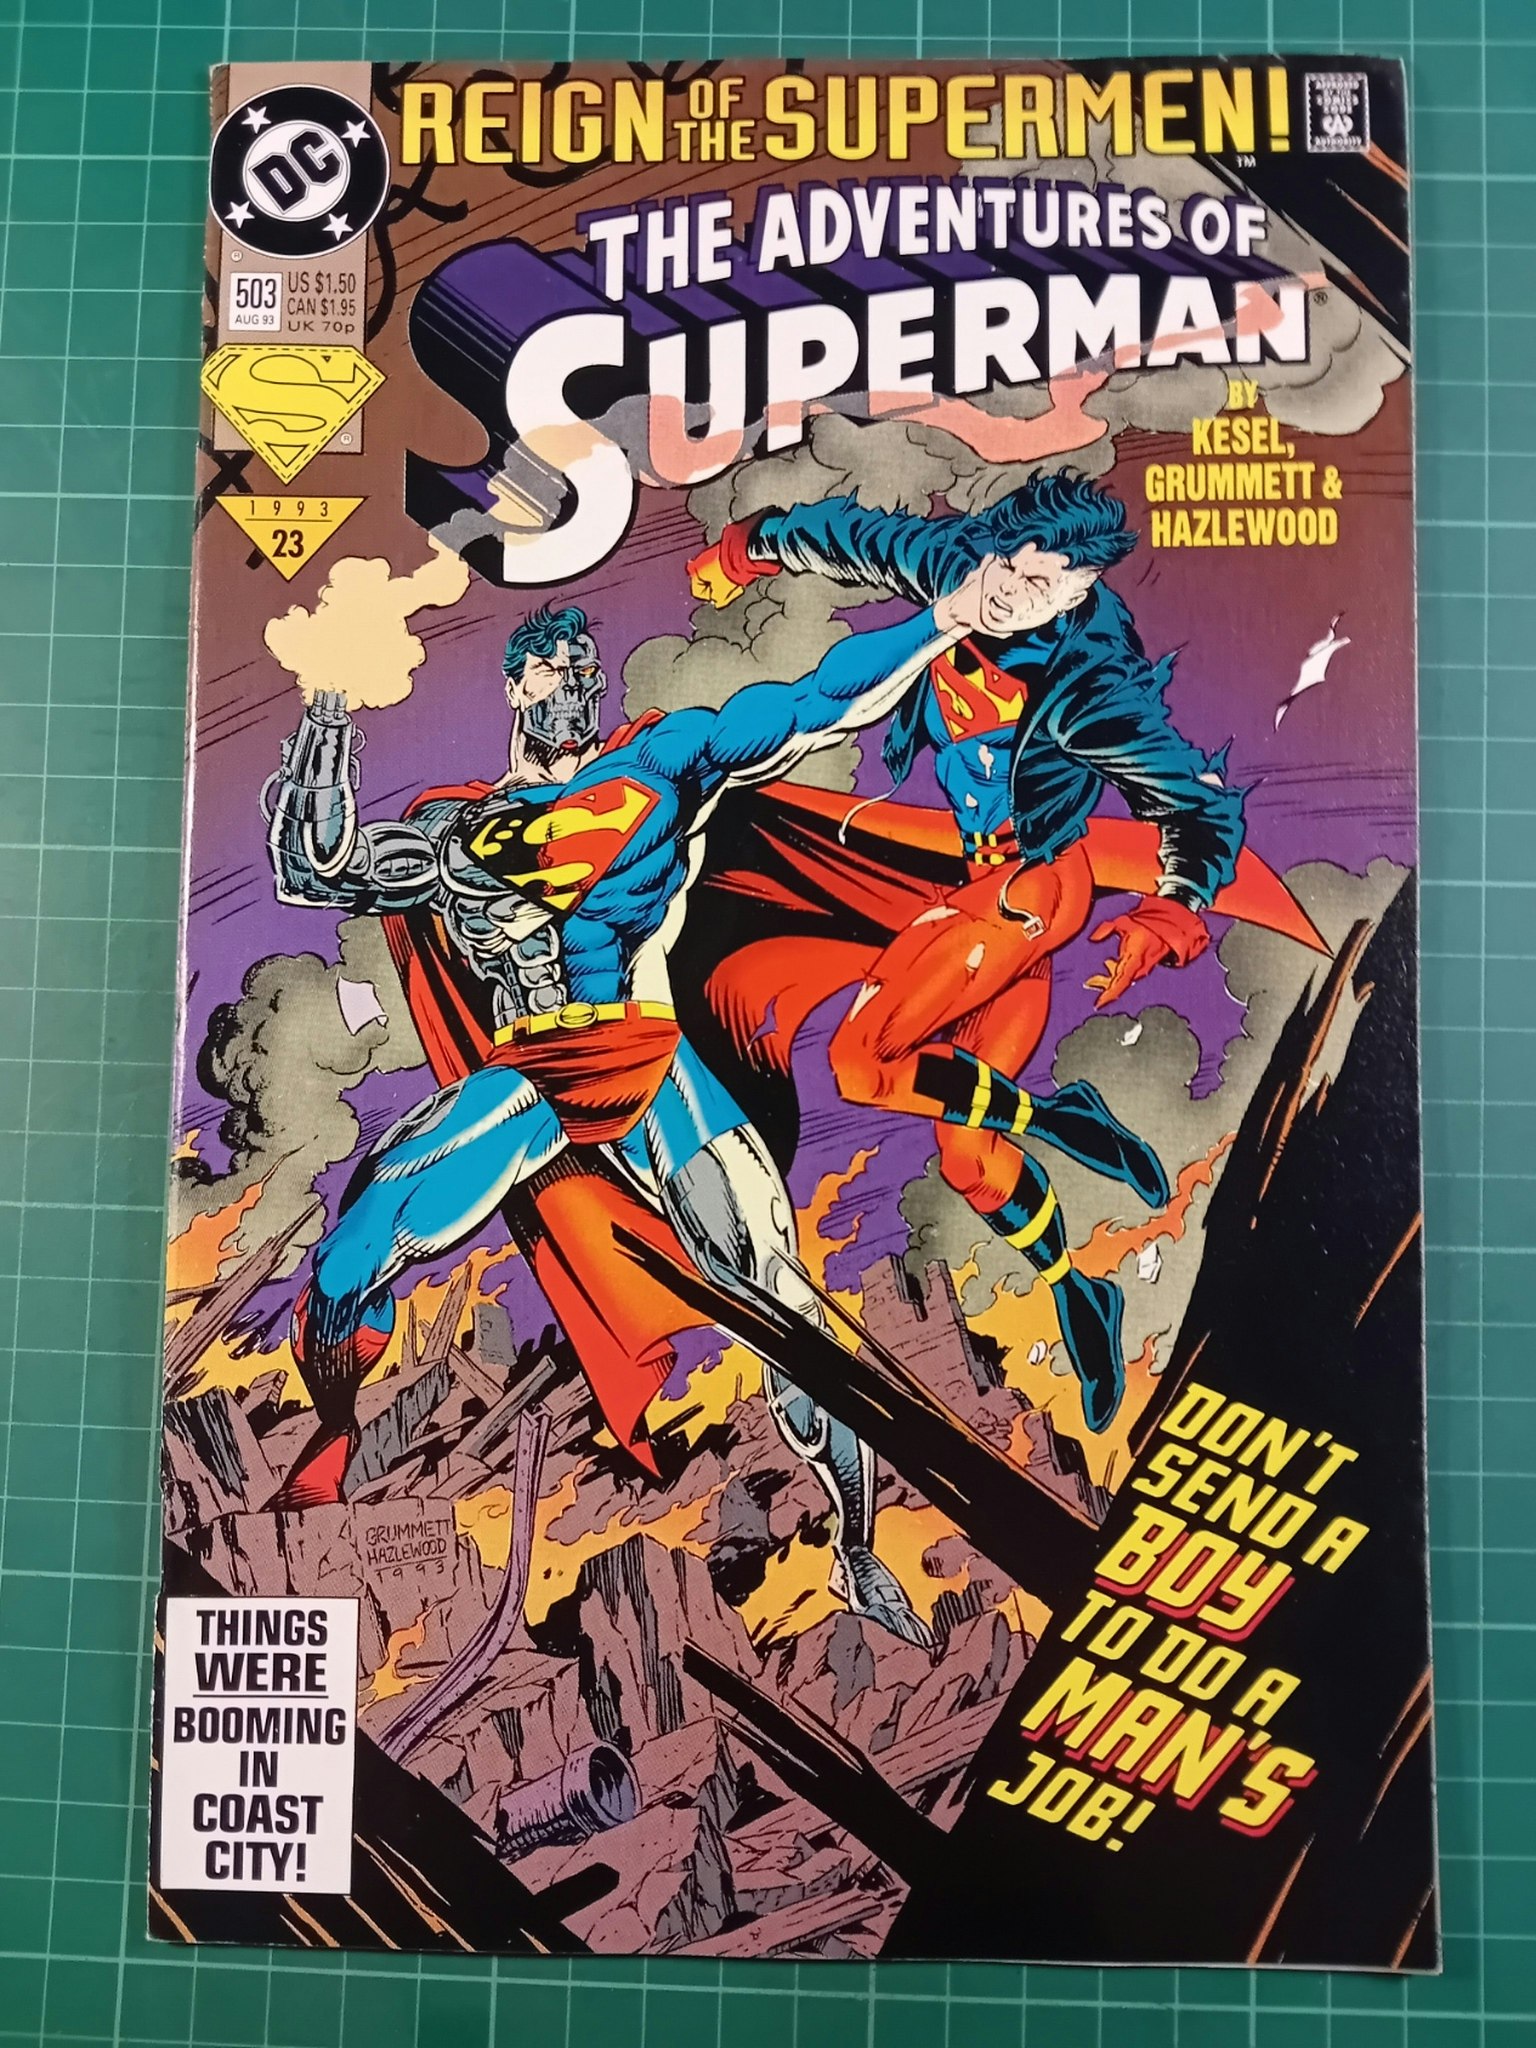 The adventures of Superman #503